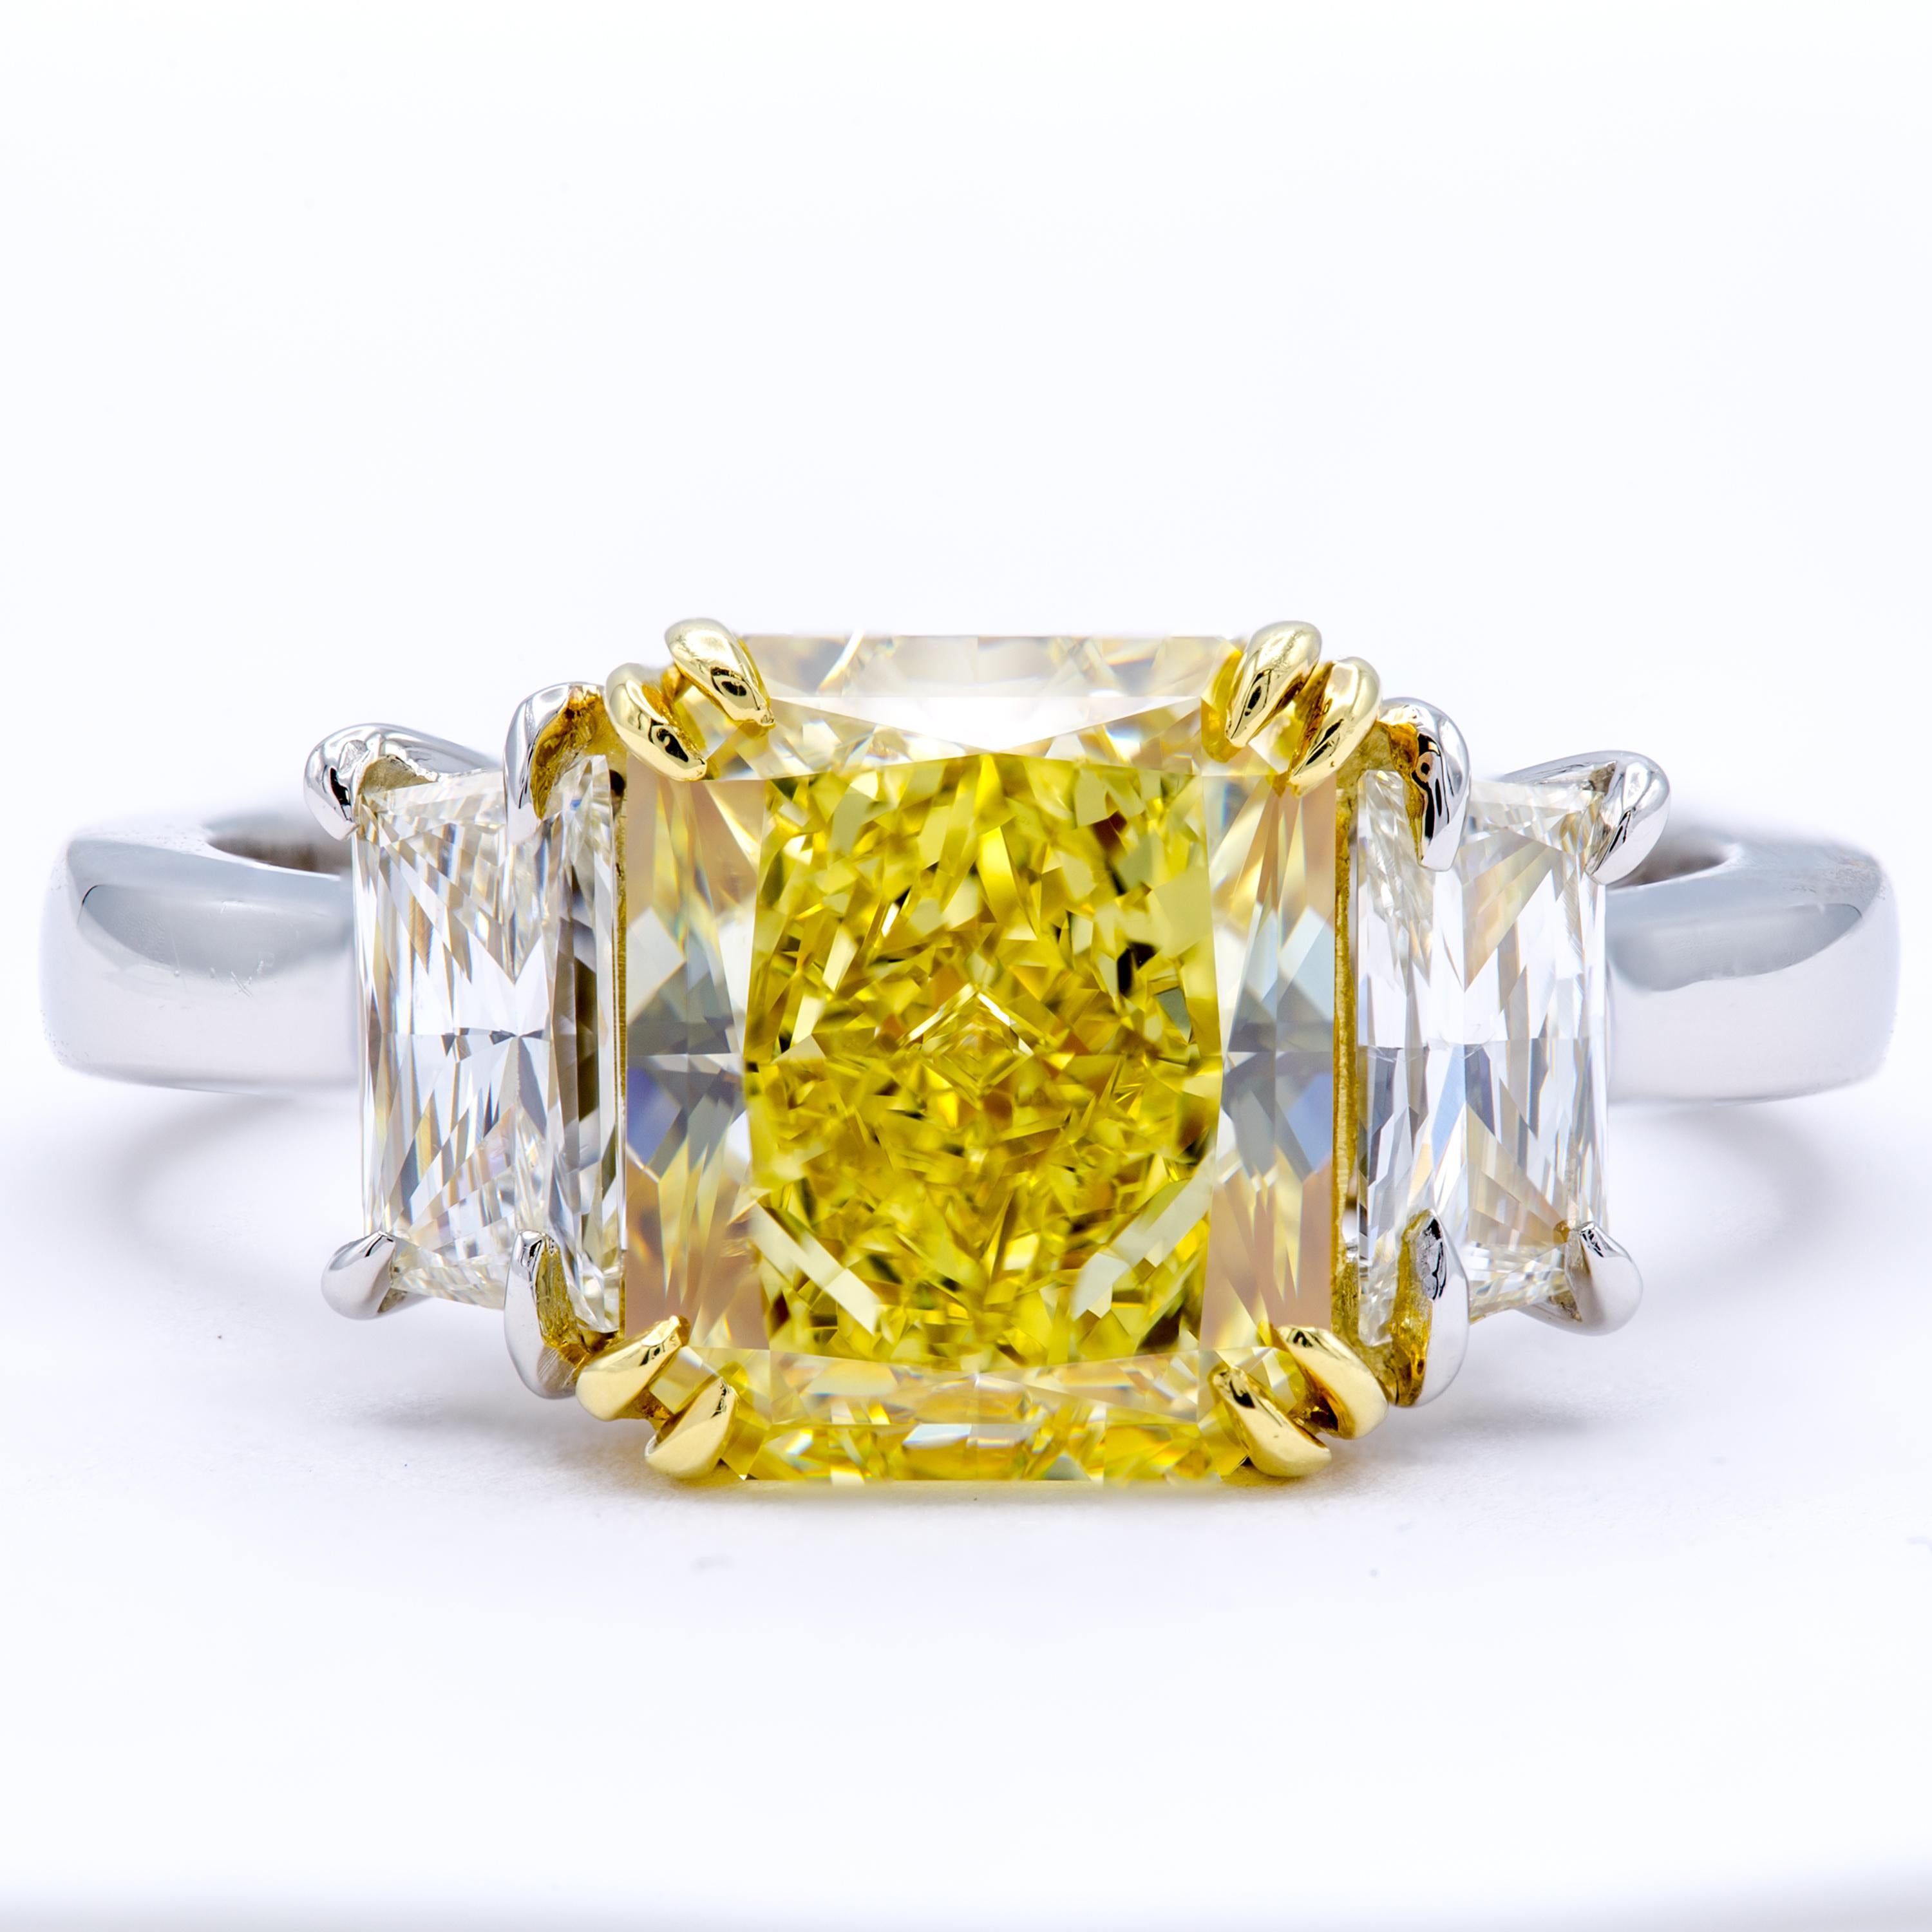 A platinum band wraps gently around the finger, securing an exceptional GIA certified 3.15 carat natural fancy intense yellow radiant diamond within a cradle of 18kt yellow gold. Two brilliant-cut trapezoid side stone diamonds accent wonderfully on